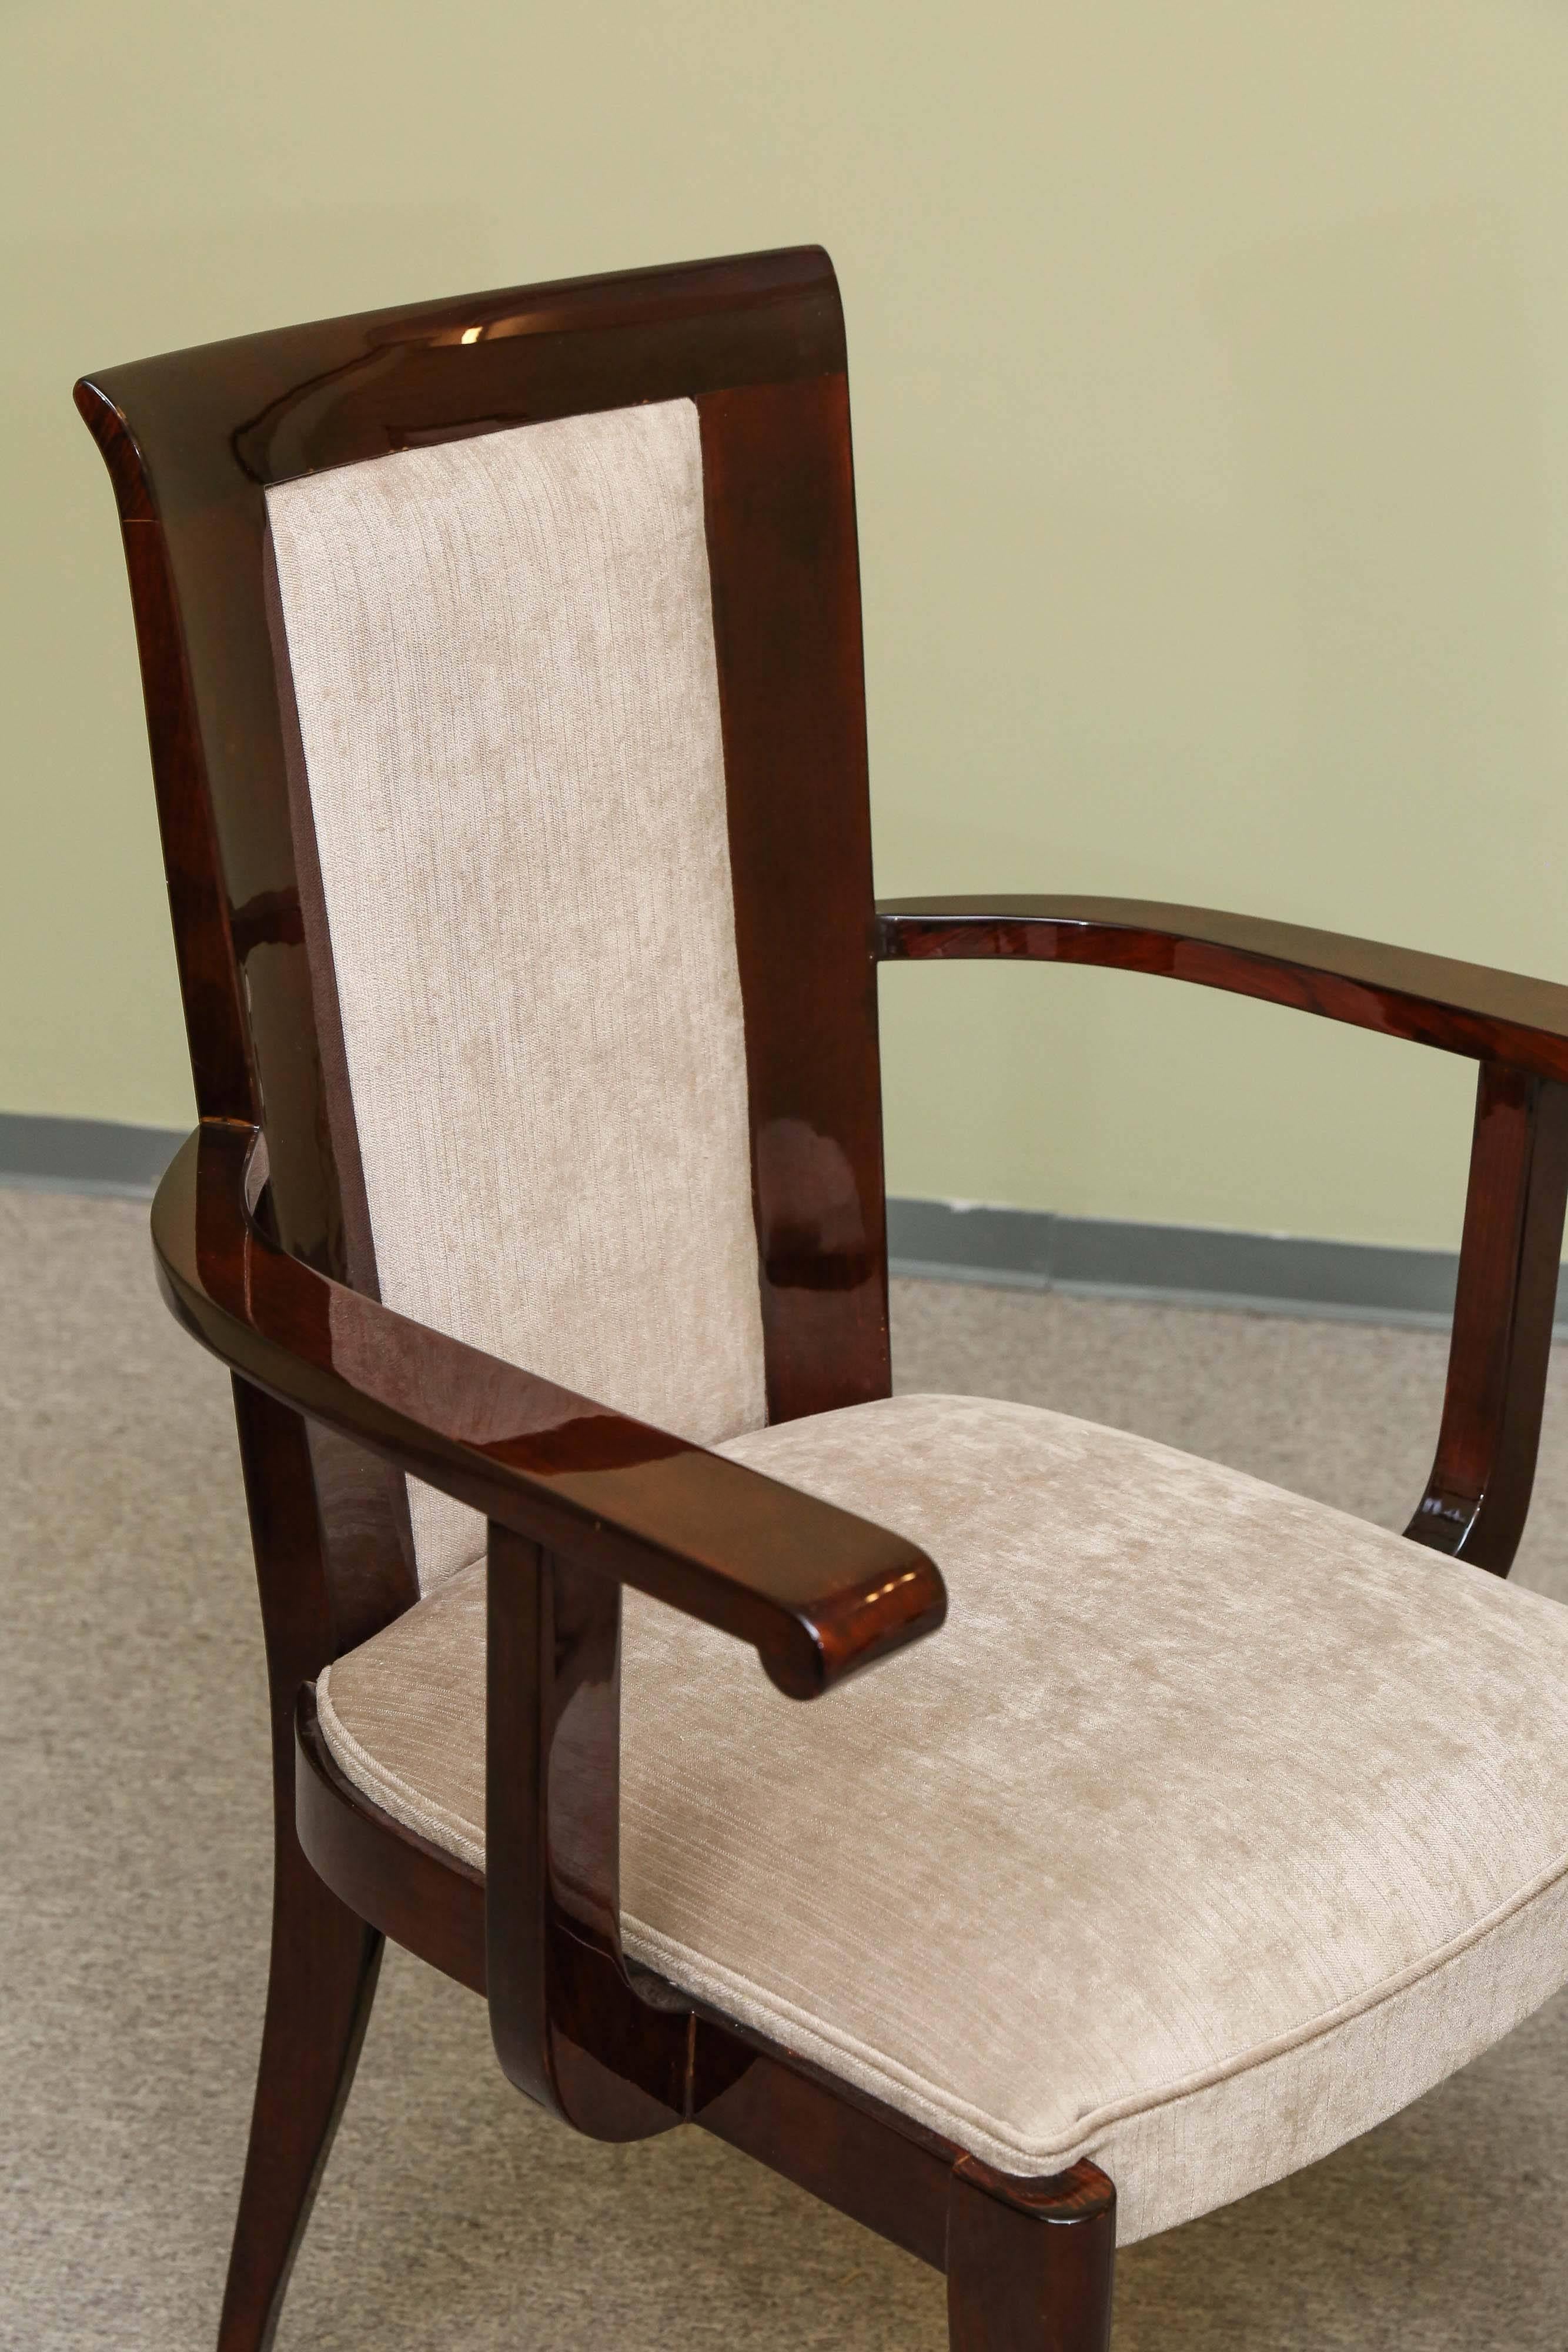 Set of ten chairs has 8 regular and two armchairs. They made out of high quality beechwood and re-upholstered in light beige velvety fabric. The chair is elevated by four slim rectangular legs.
Condition is perfect.
Could be sold